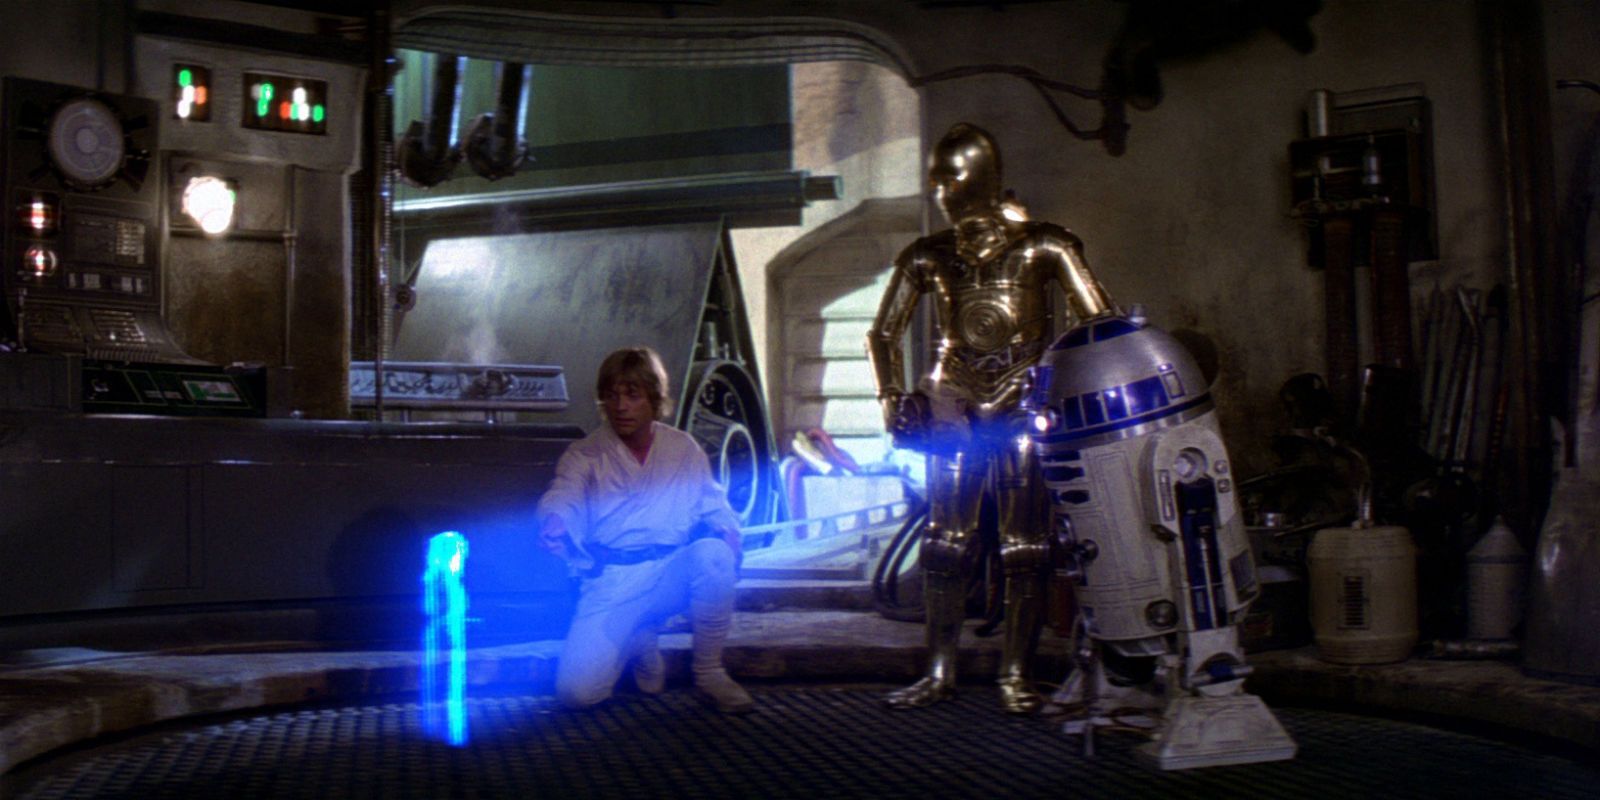 Luke Skywalker and C-3PO watch R2-D2 display a hologram of Princess Leia in Star Wars A New Hope